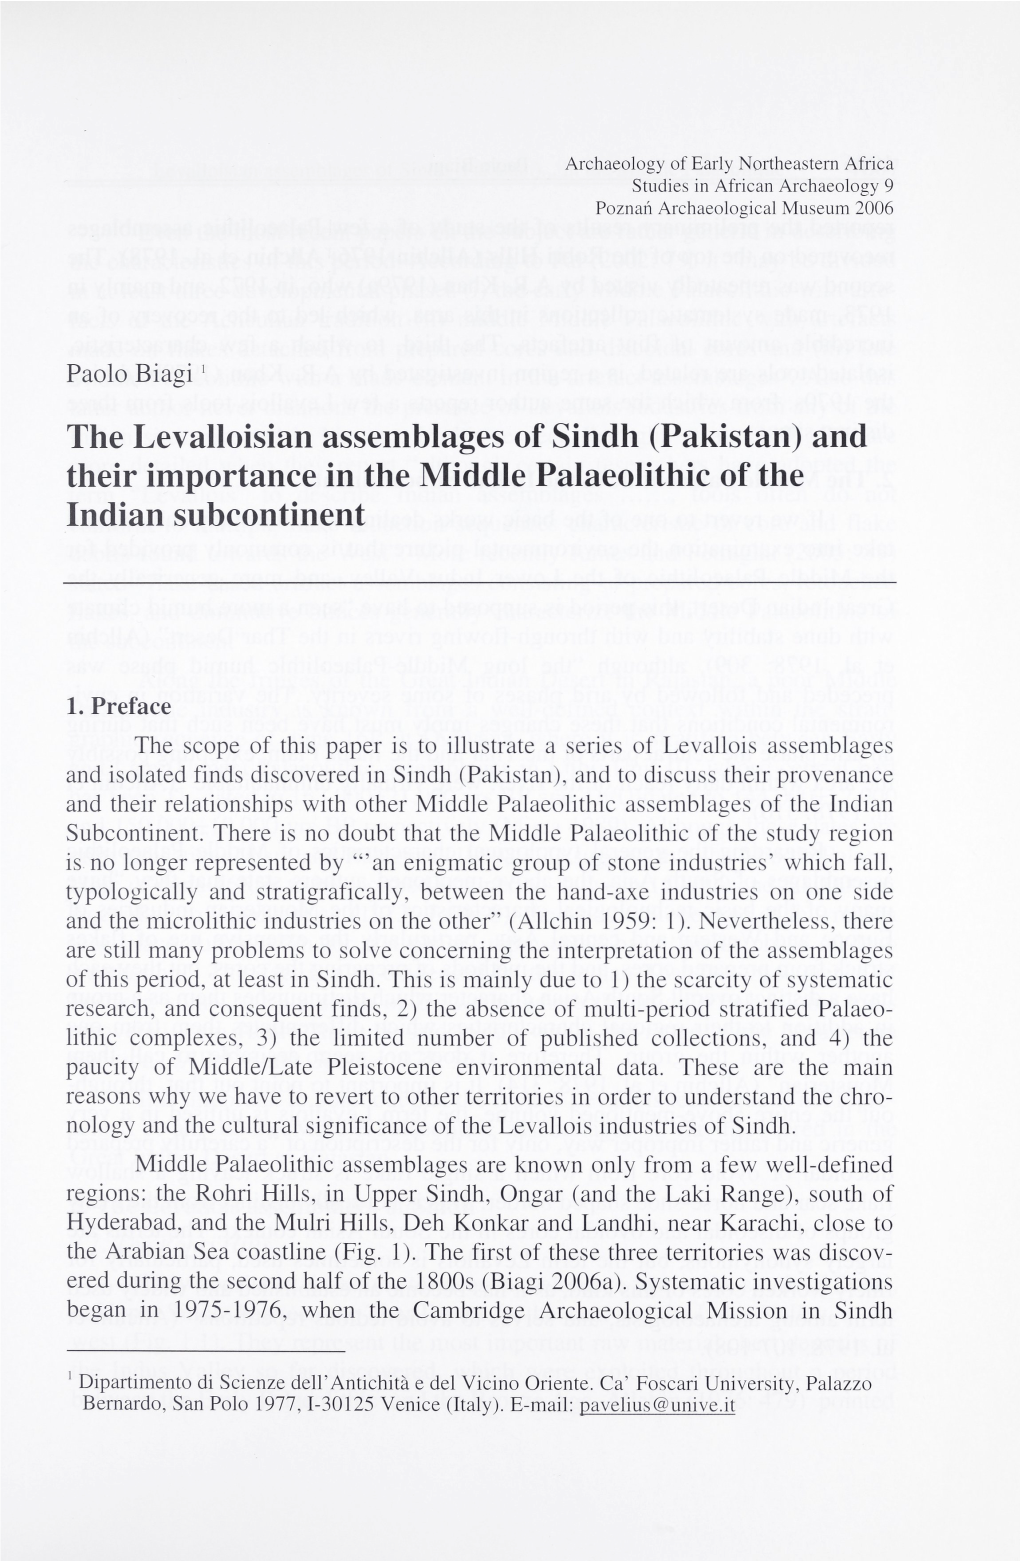 The Levalloisian Assemblages of Sindh (Pakistan) and Their Importance in the Middle Palaeolithic of the Indian Subcontinent